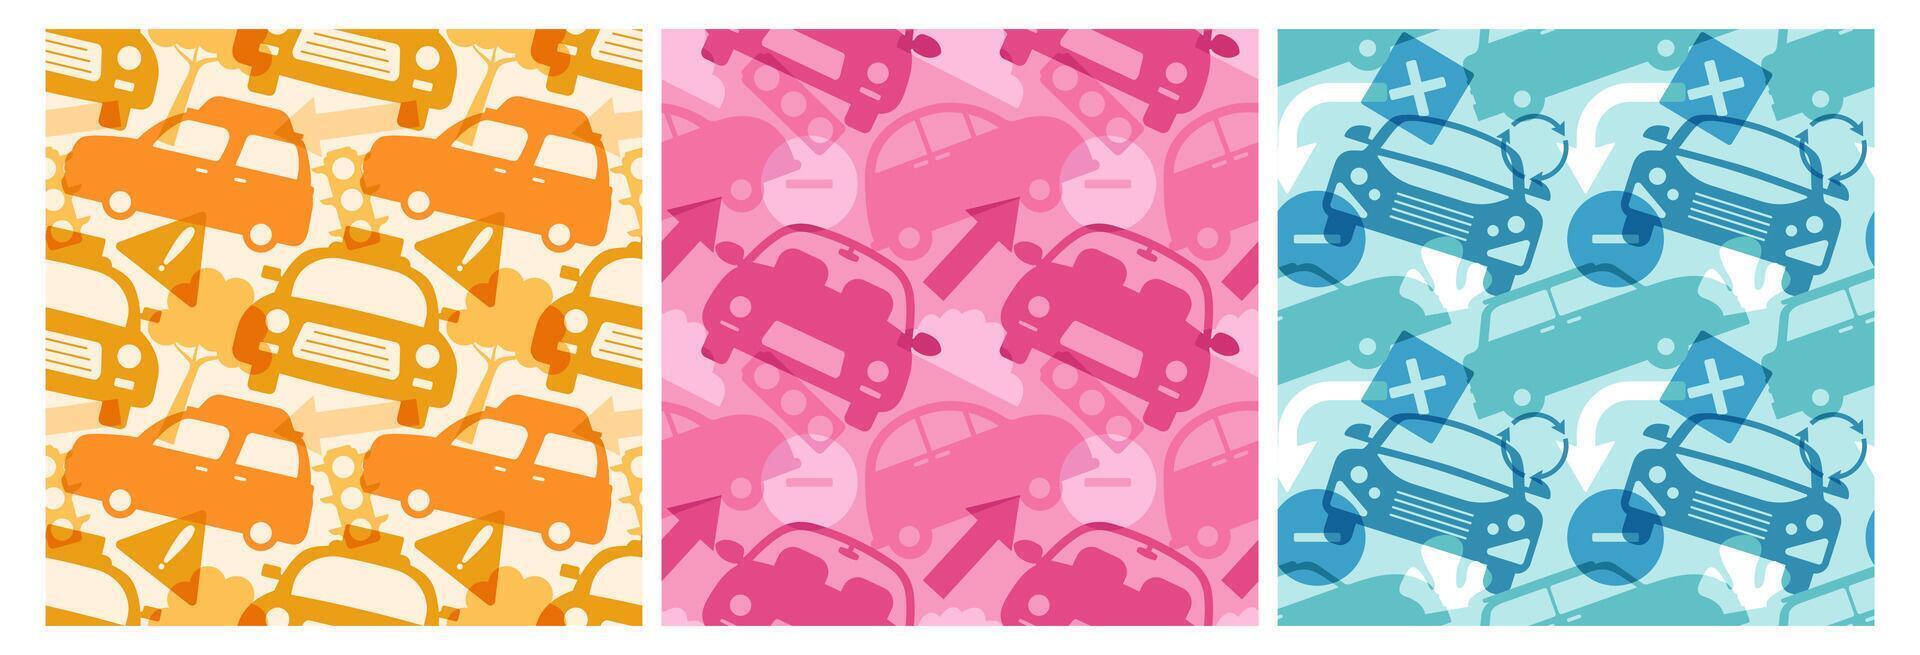 Car Toys Seamless Pattern Design with Boys and Girls Children Toy Equipment in Cartoon Illustration vector